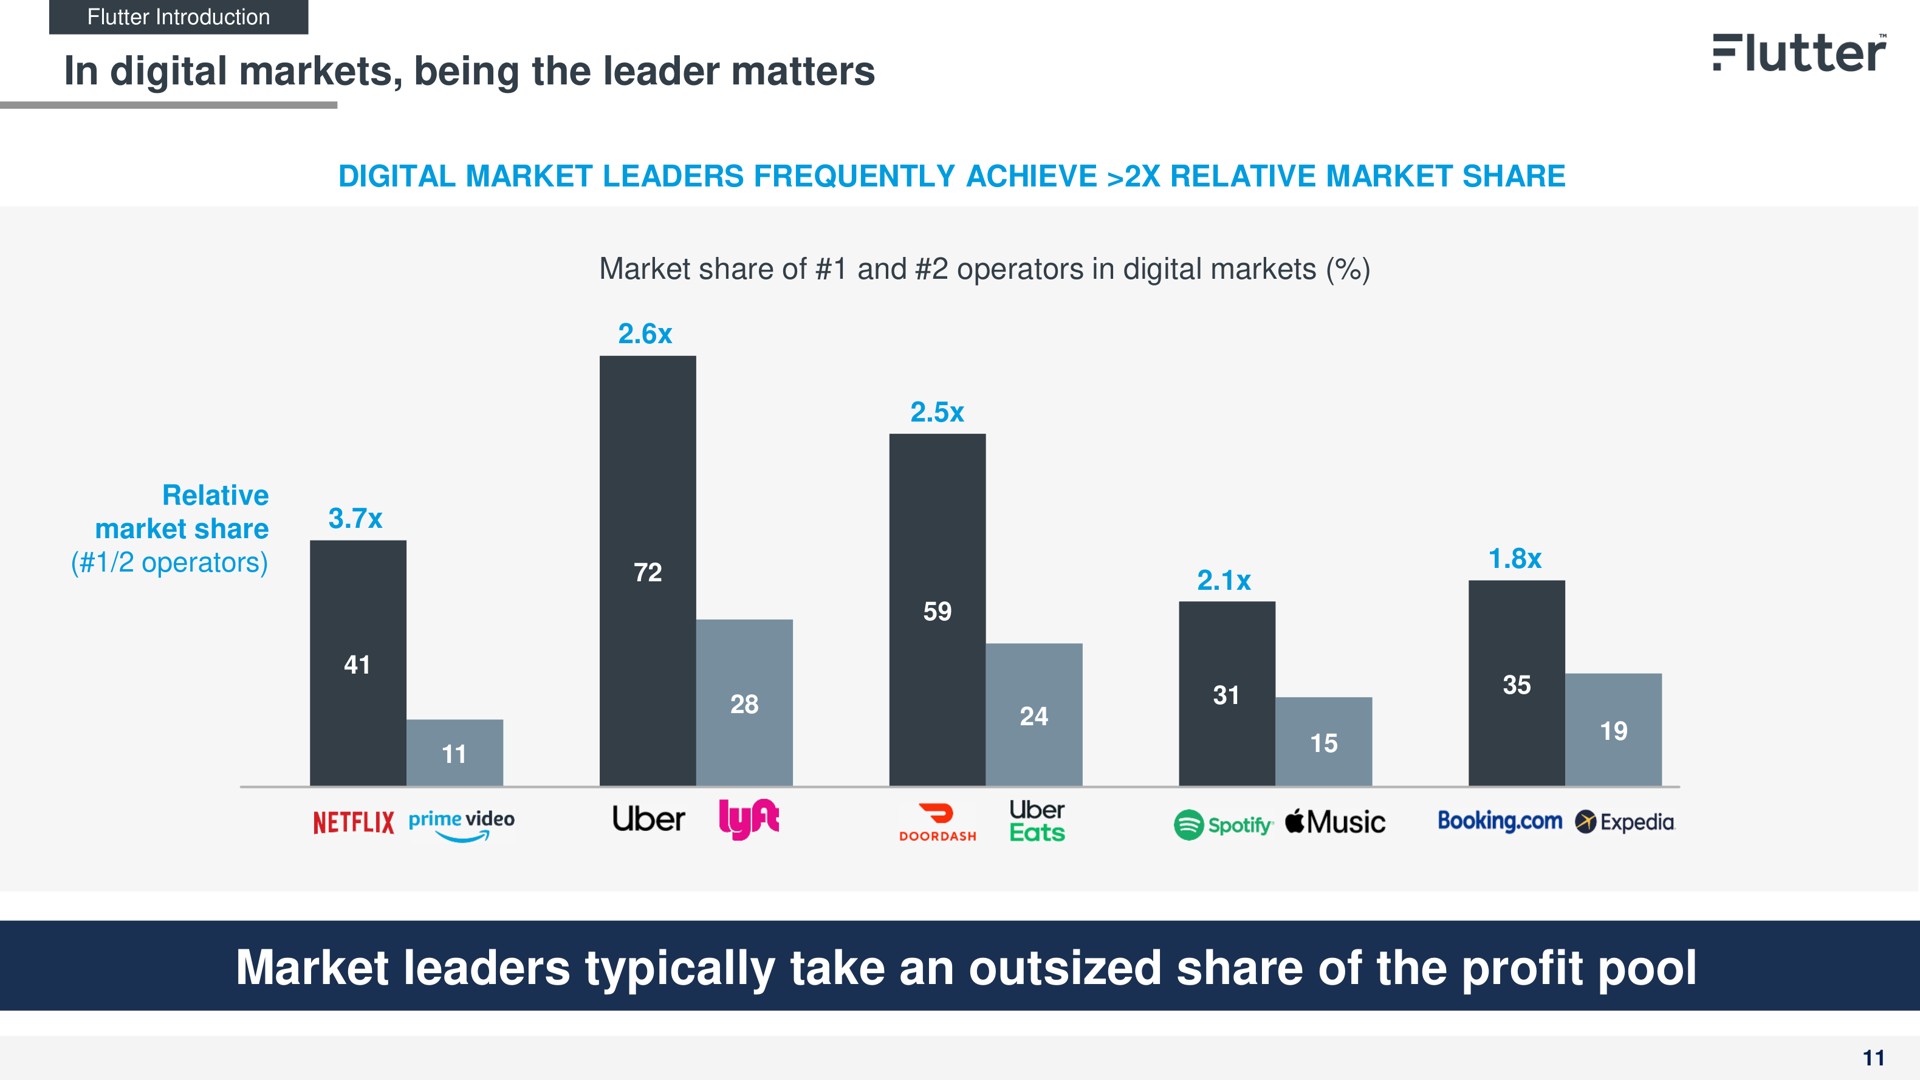 in digital markets being the leader matters market leaders typically take an outsized share of the profit pool | Flutter